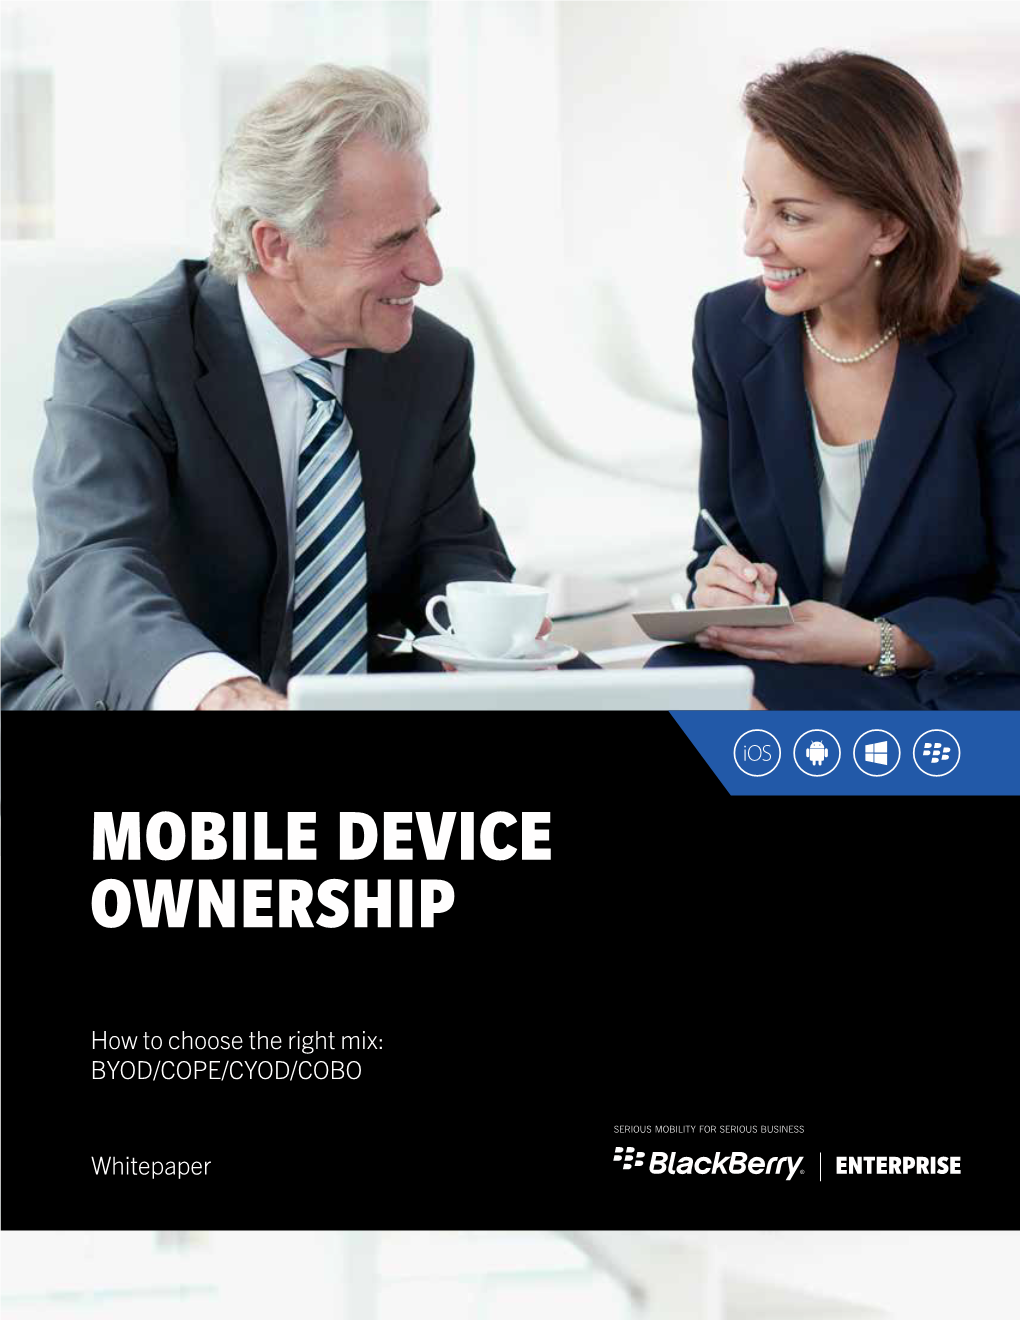 Mobile Device Ownership: How to Choose the Right Mix